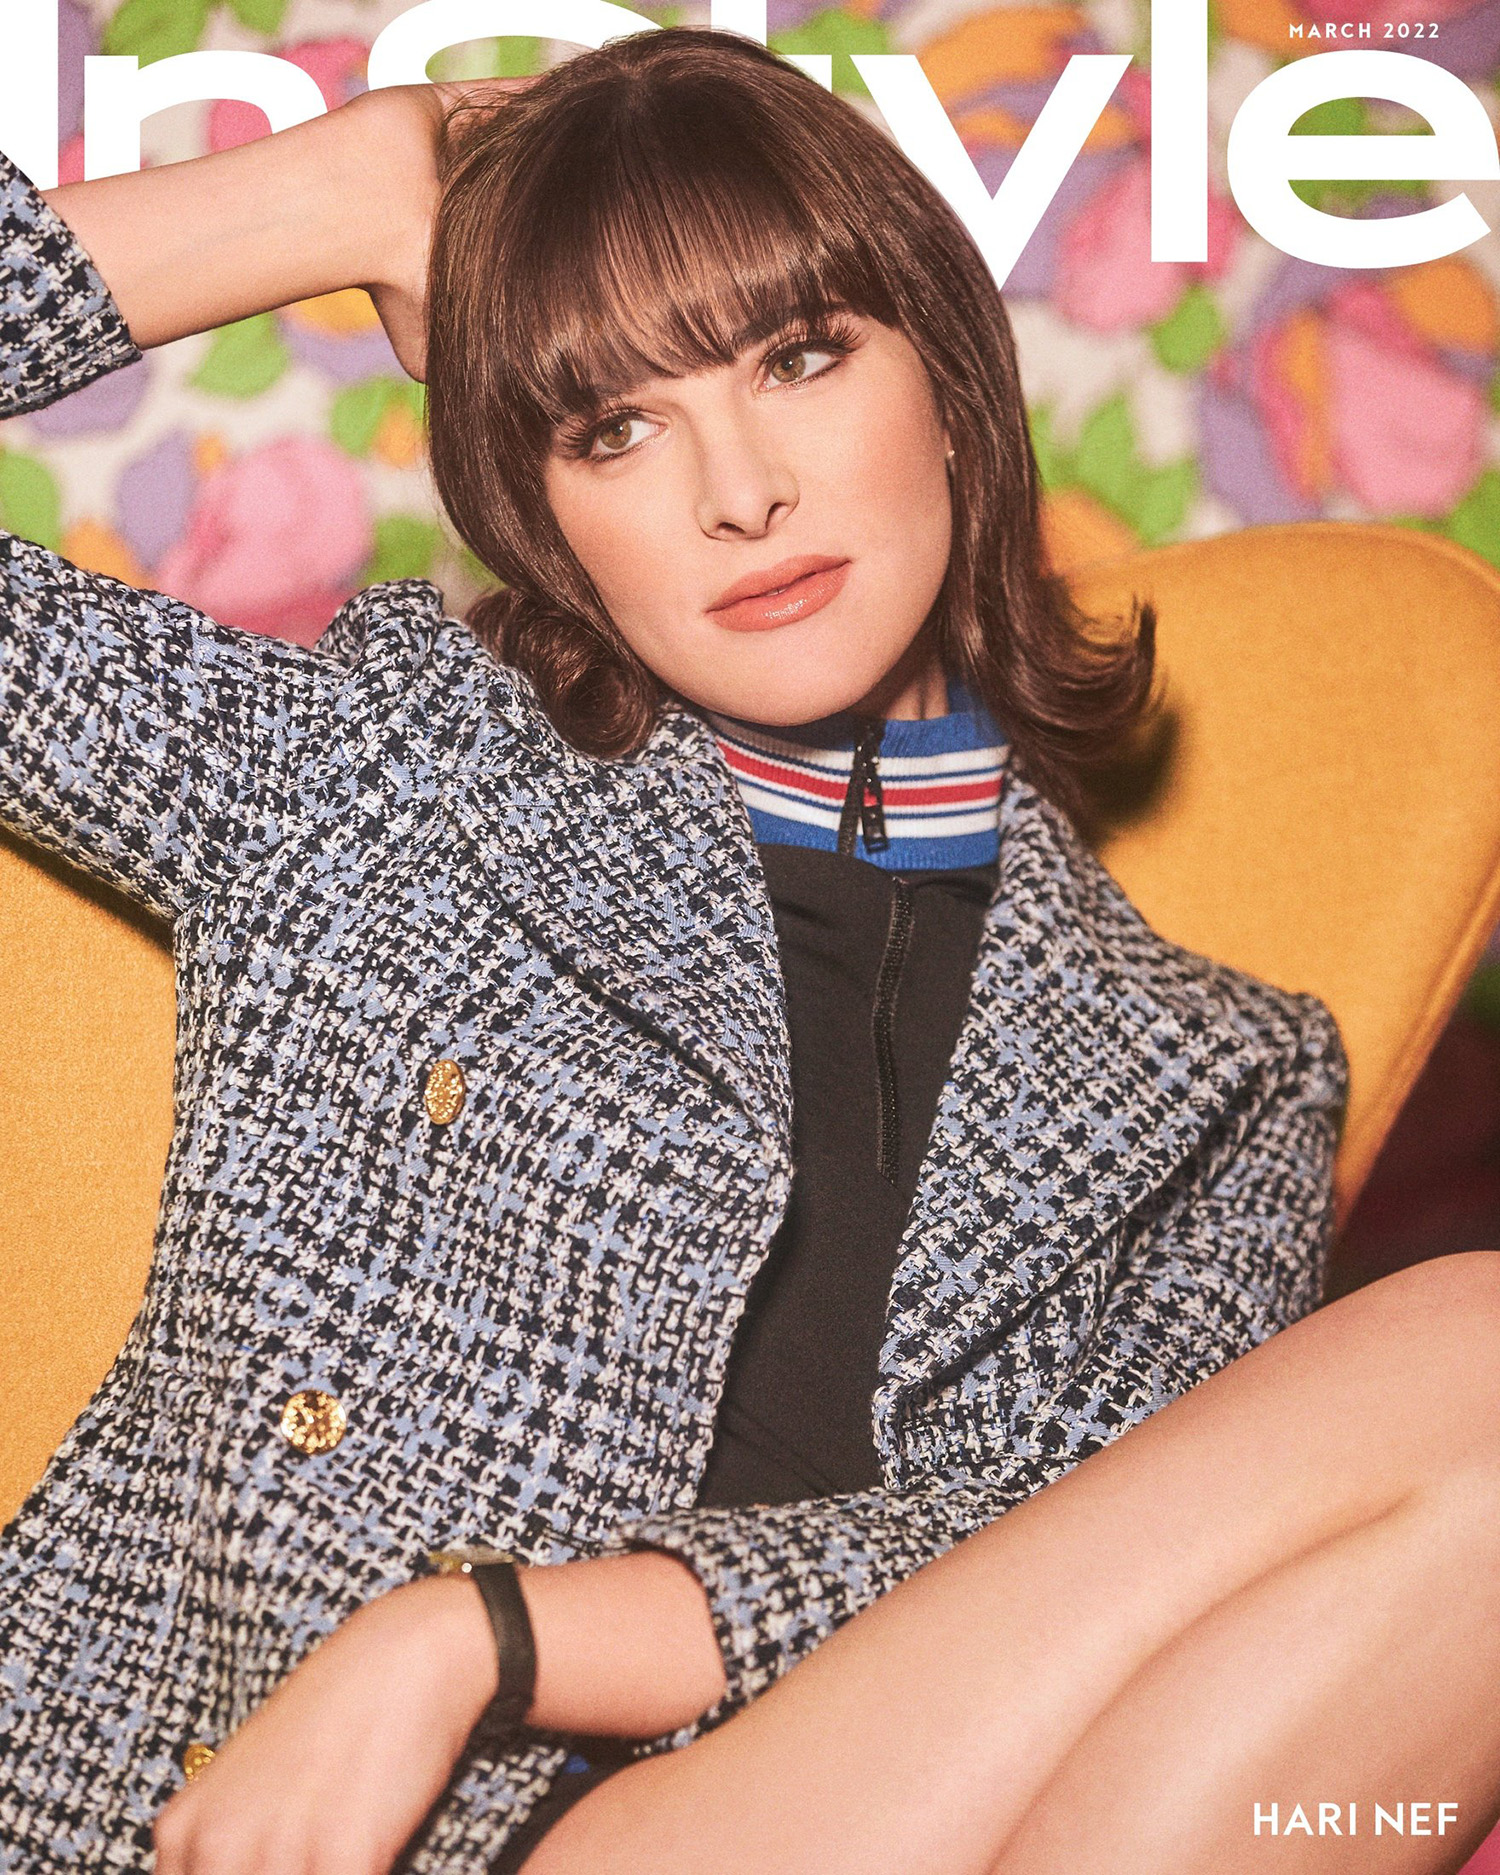 Hari Nef covers InStyle US March 2022 Digital Edition by Tom Allen